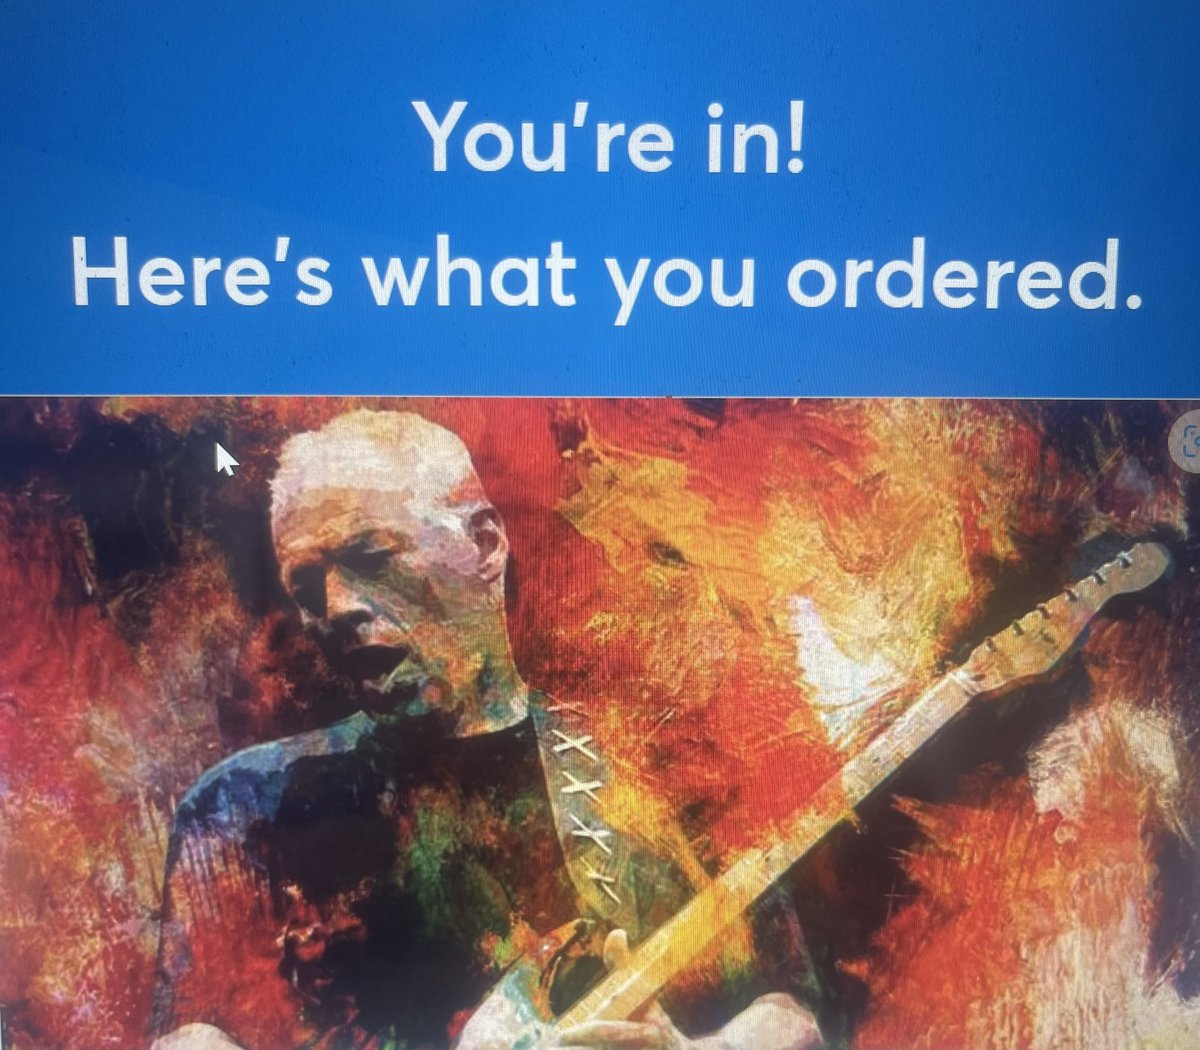 Well this never happens to me 🙌🏻 @Haydne wasn’t even in the queue when this appeared for me. @davidgilmour at the Royal Albert Hall here we come 🎸 #DavidGilmour #DaveGilmour #PinkFloyd #Legend #RoyalAlbertHall #LuckAndStrange #Tour #LiveMusic #GuitarLegend